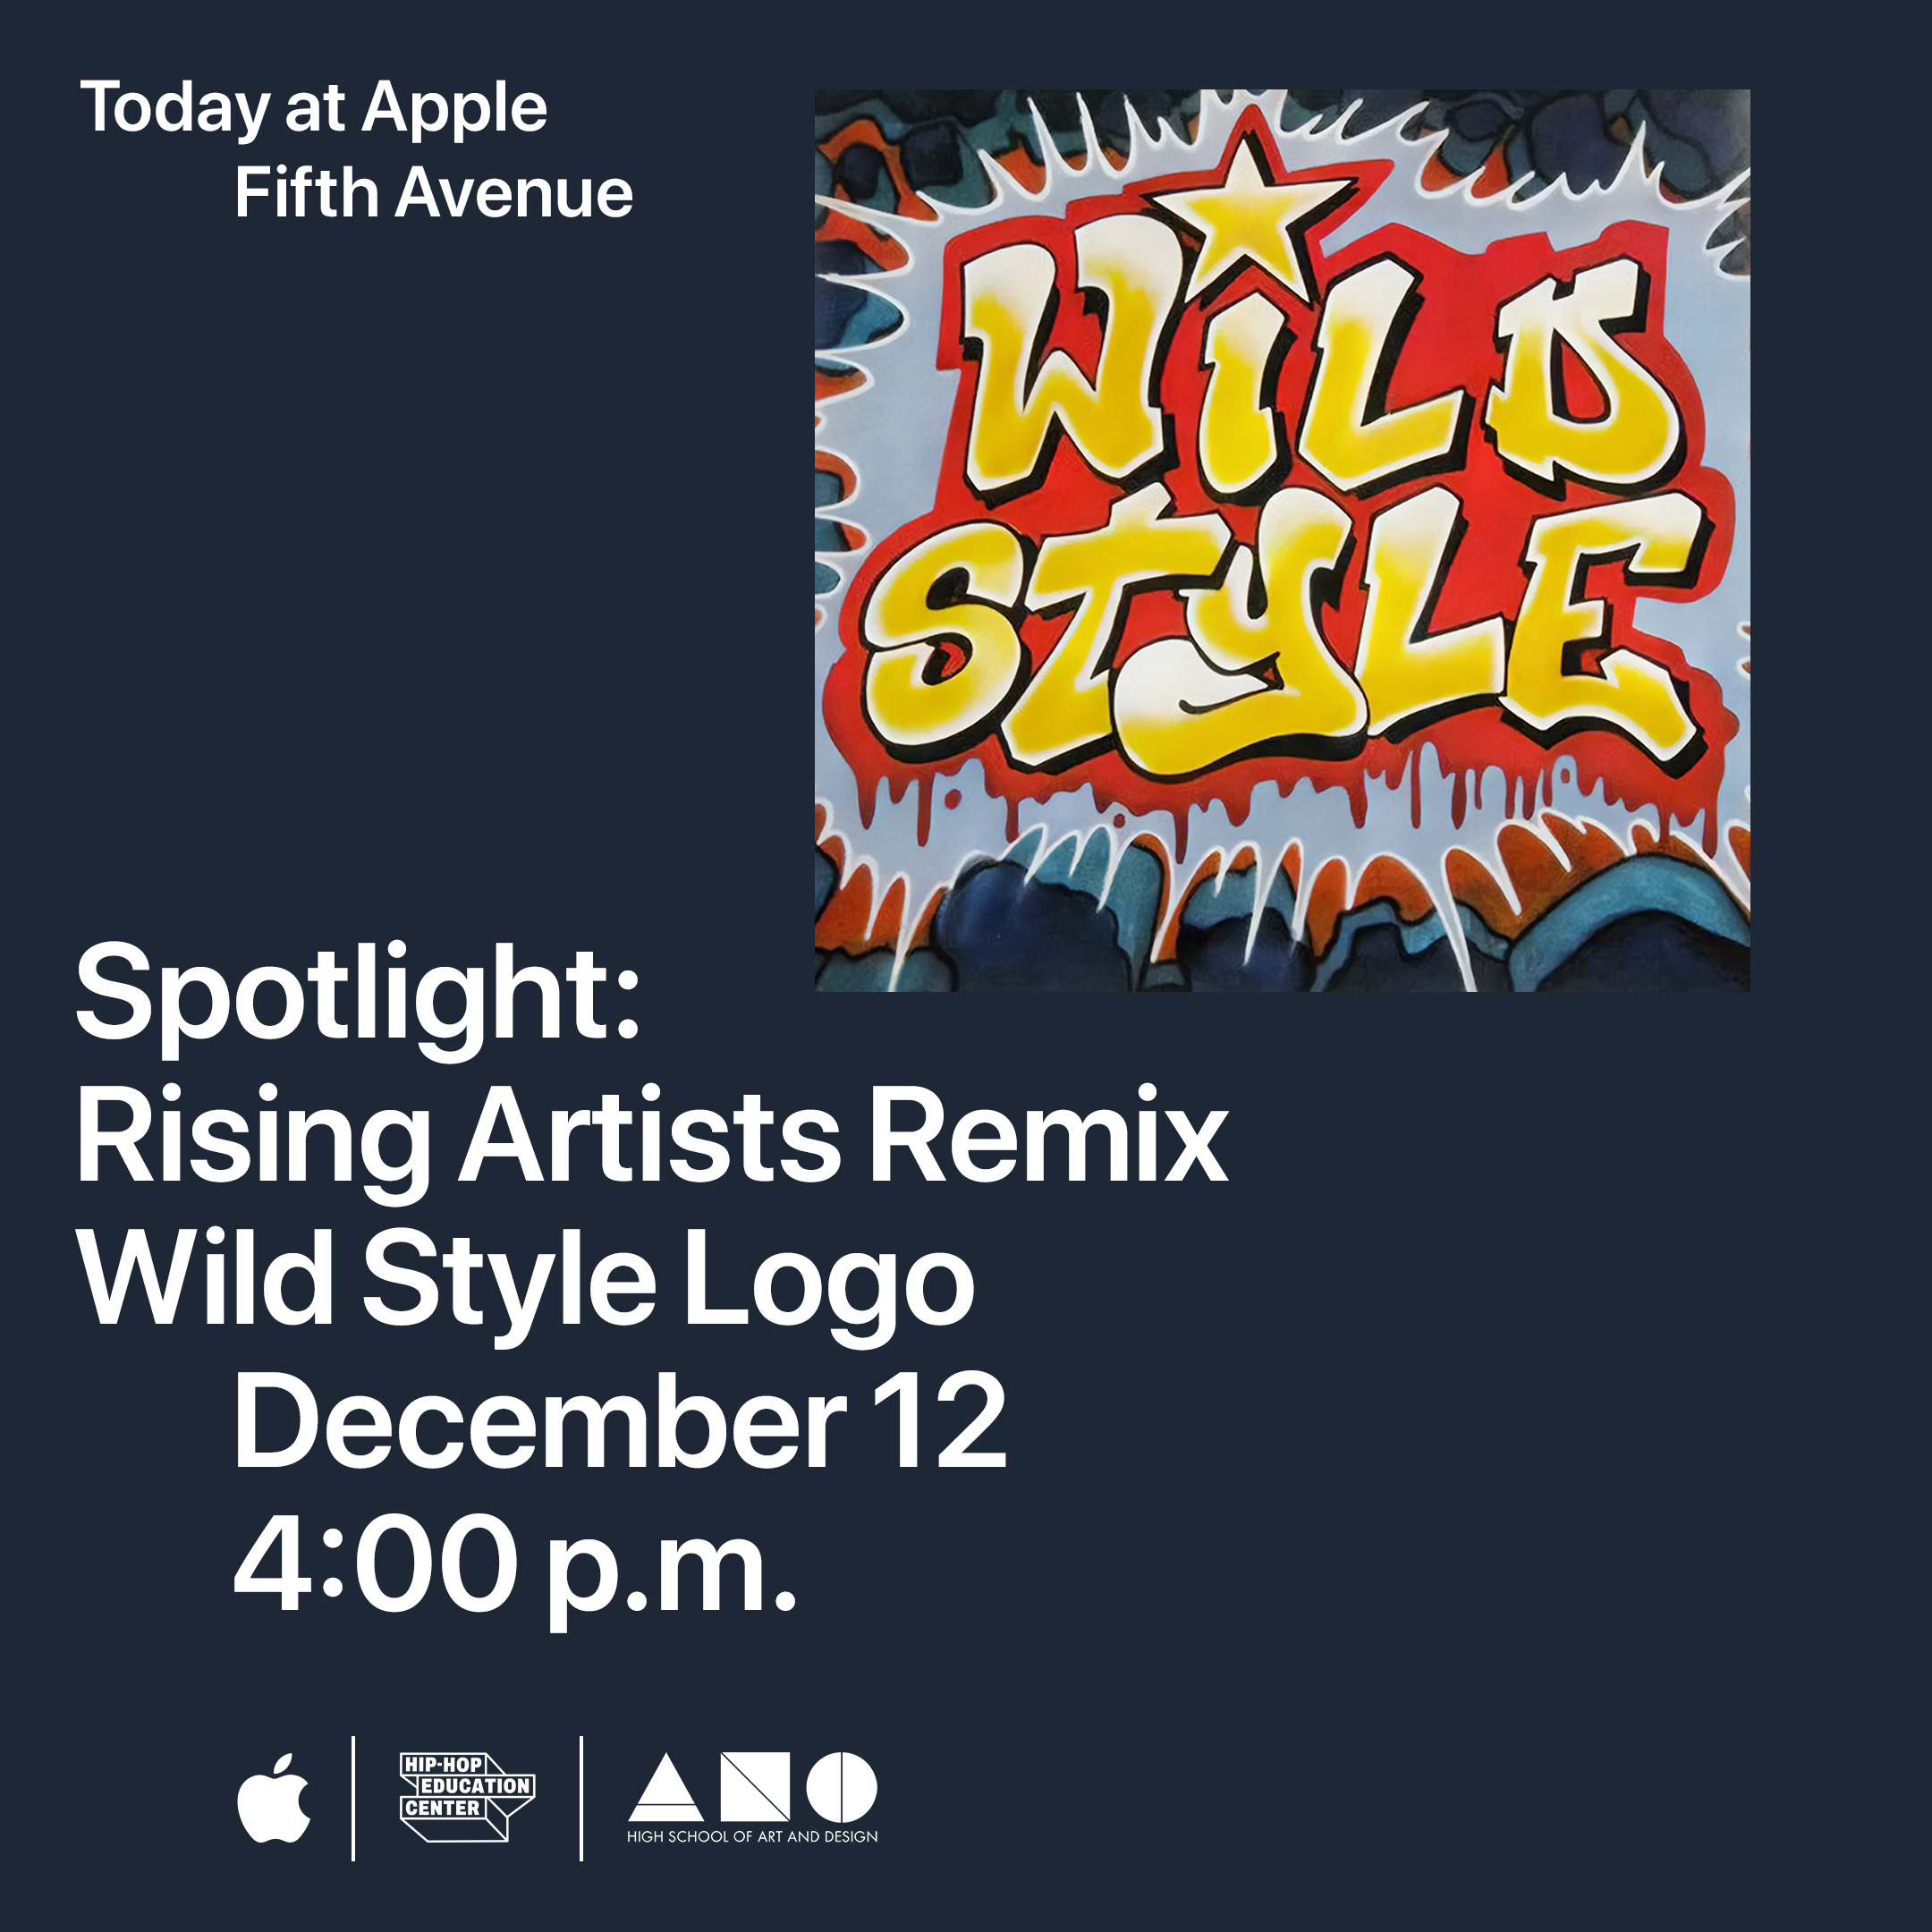 Wild Style Logo Remix by Rising Artists